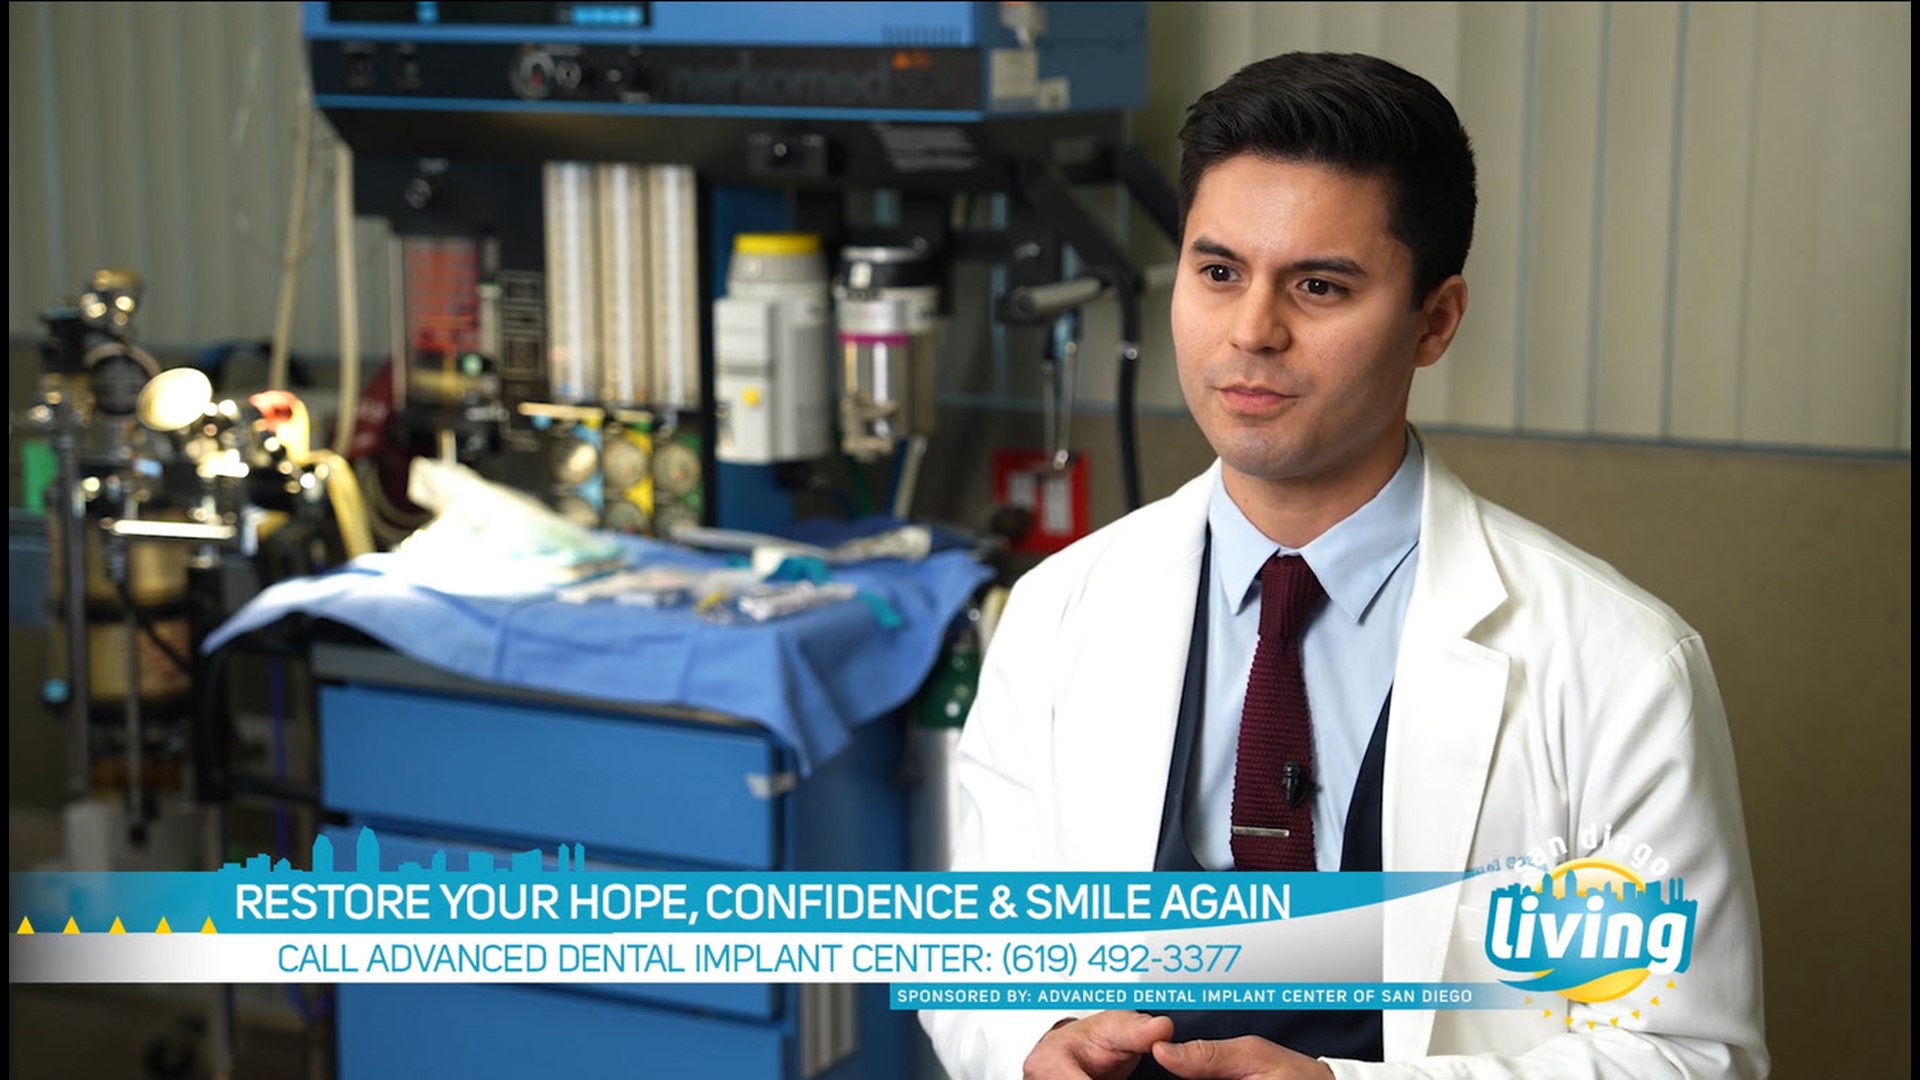 Get Your Smile Back With Same Day, Full Mouth Dental Implant Solutions. Sponsored by Advanced Dental Implant Center